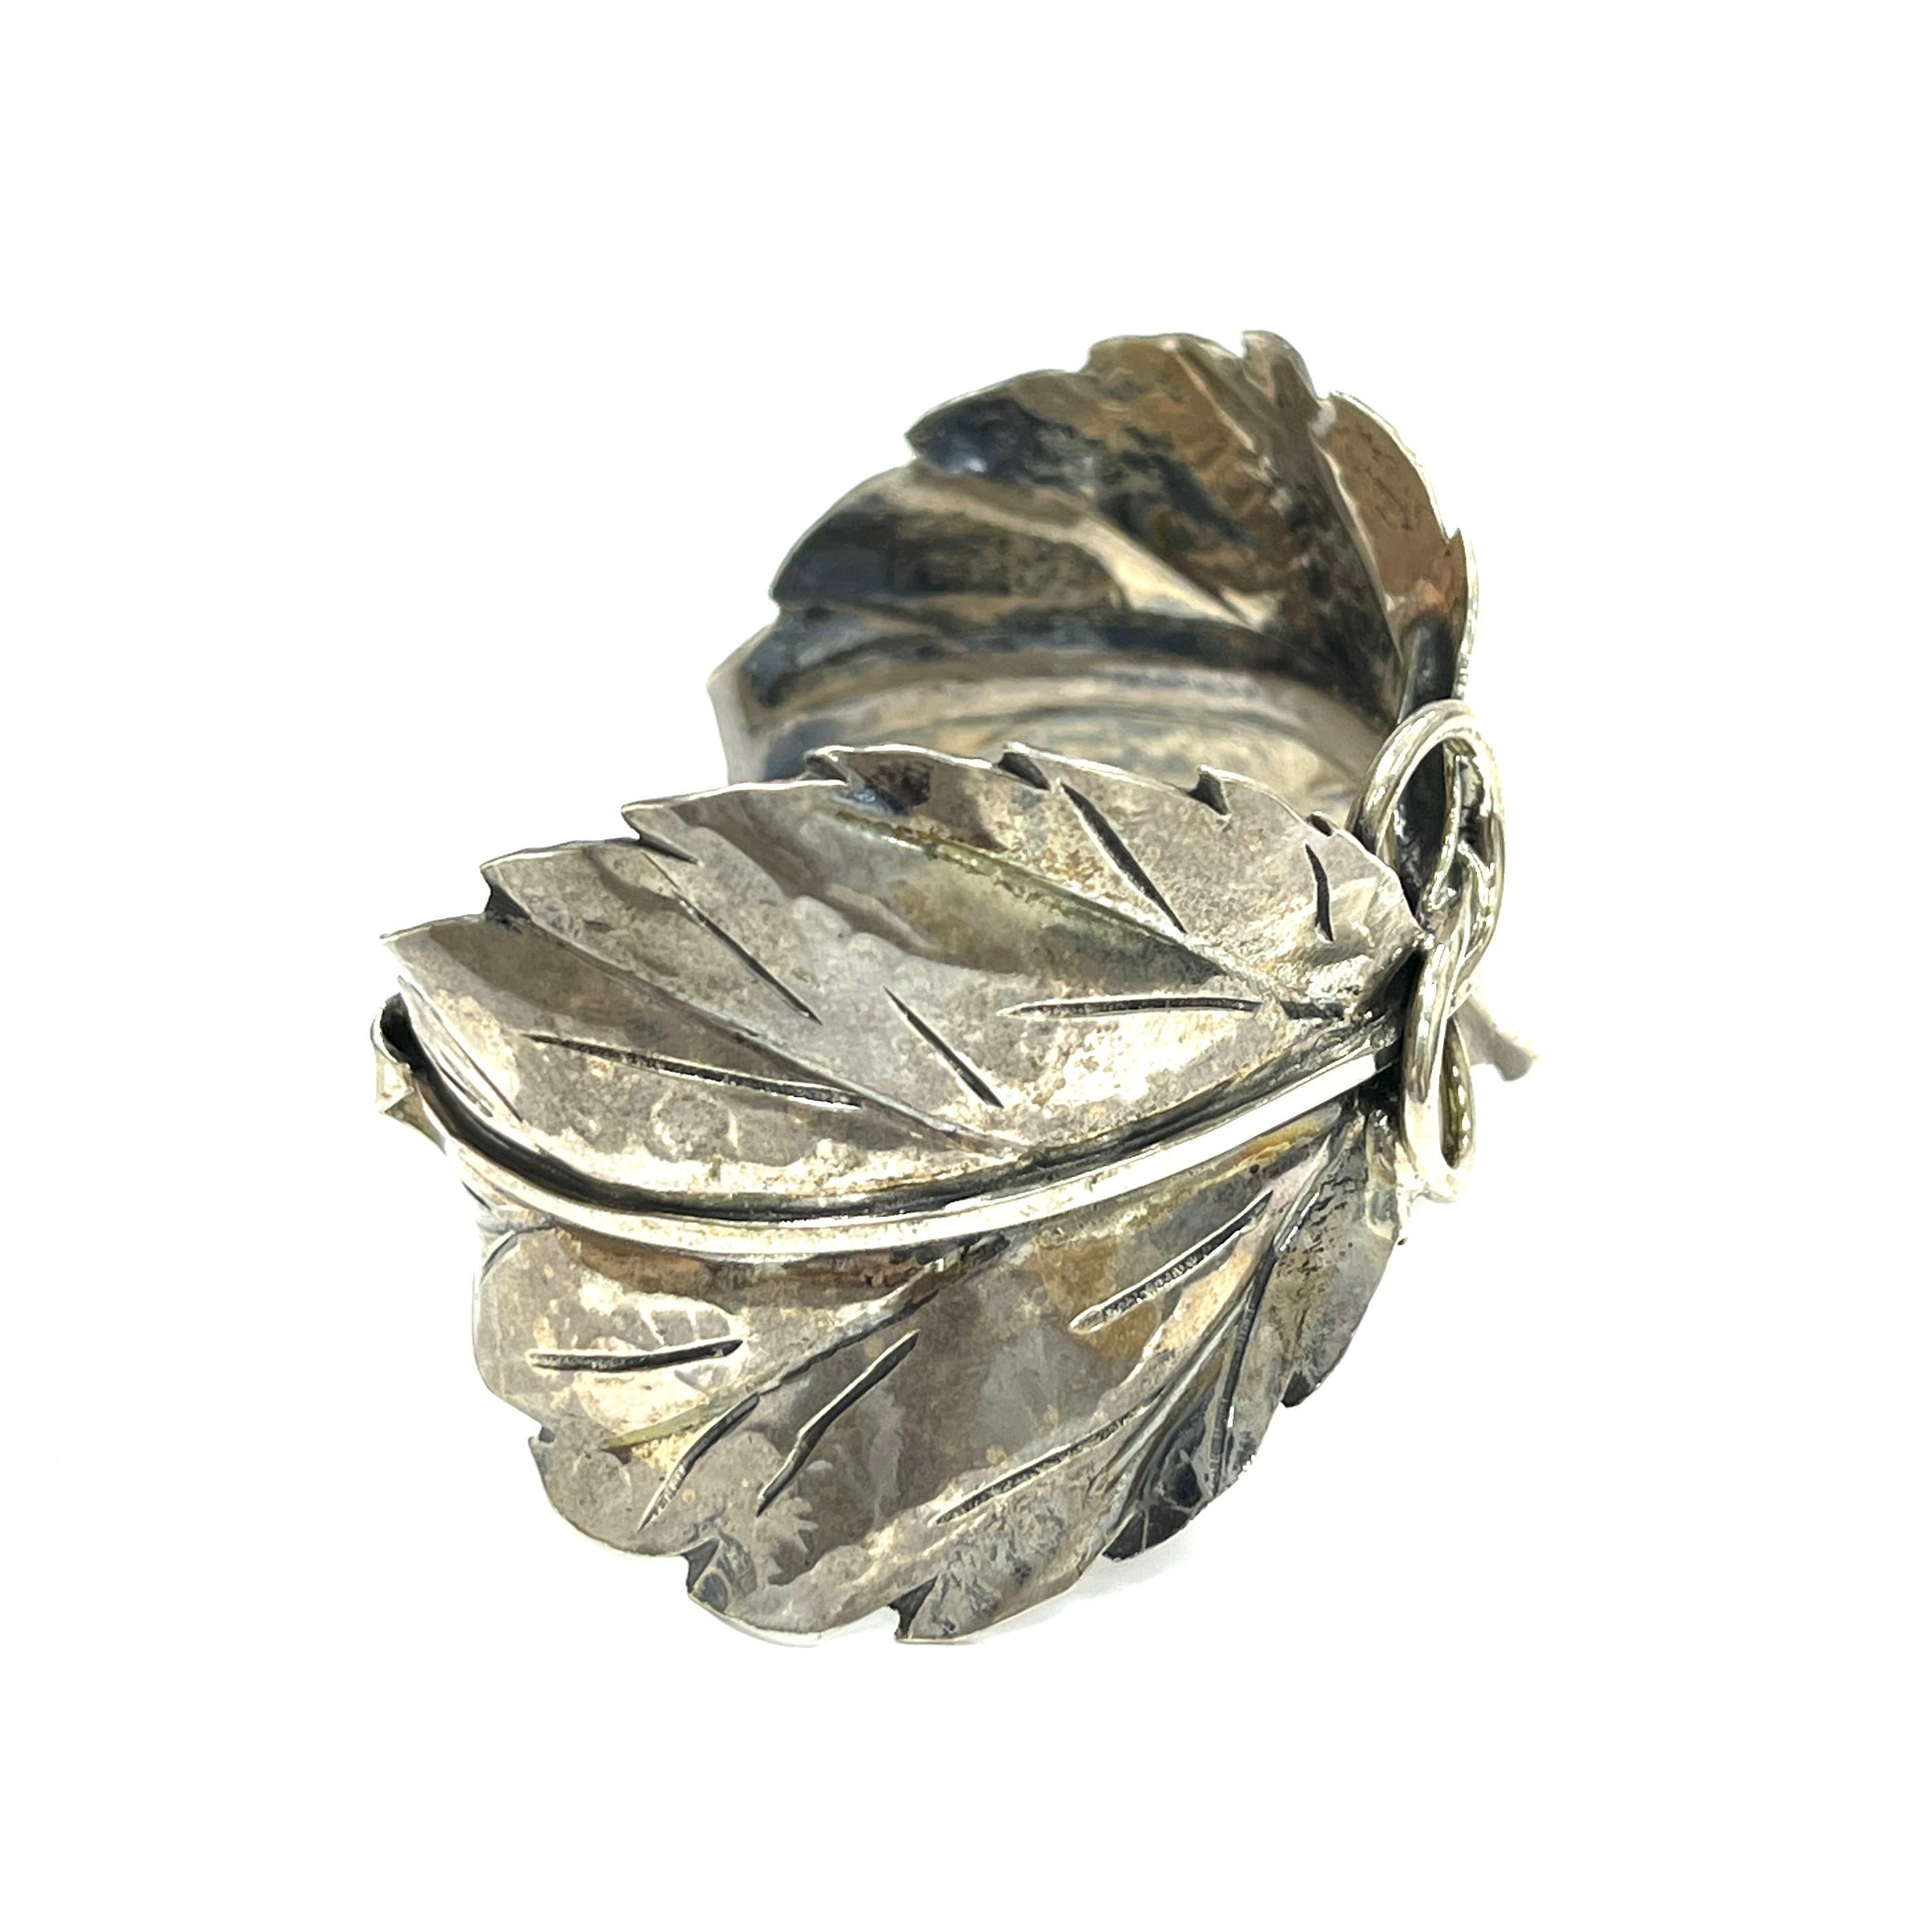 Buccellati Mario Leaf Sterling Silver Cuff Bracelet, Italian

Two apple leaves made out of sterling silver; marked Buccellati, Italy, 925, Sterling

Size: width 1.75 inches; inner circumference 6.5 inches
Total weight: 38.0 grams